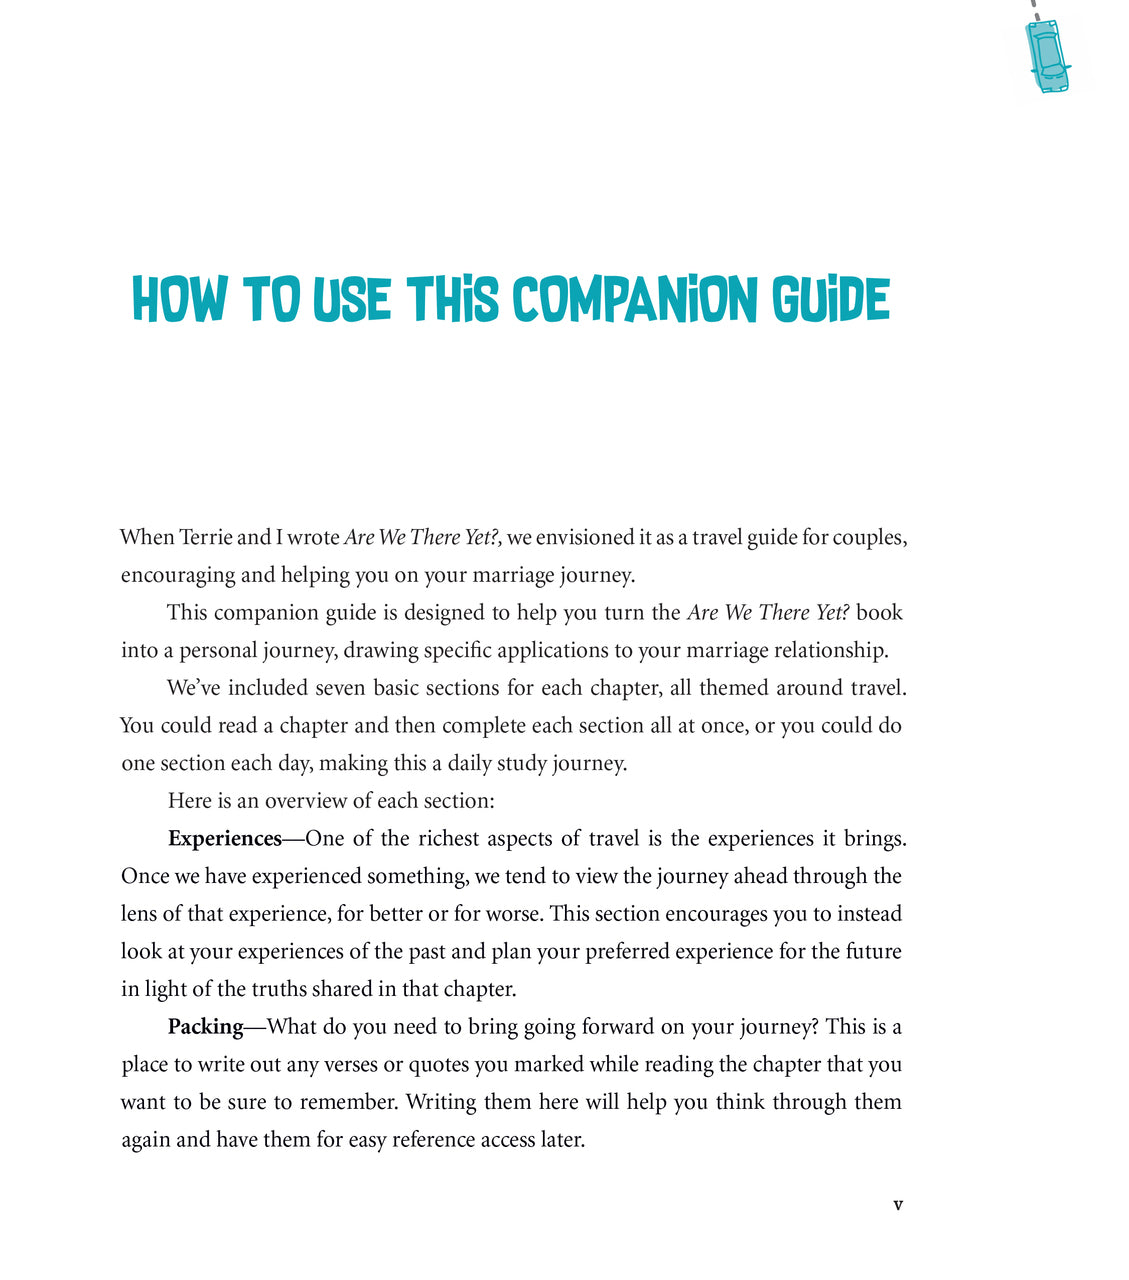 Are We There Yet? Companion Guide